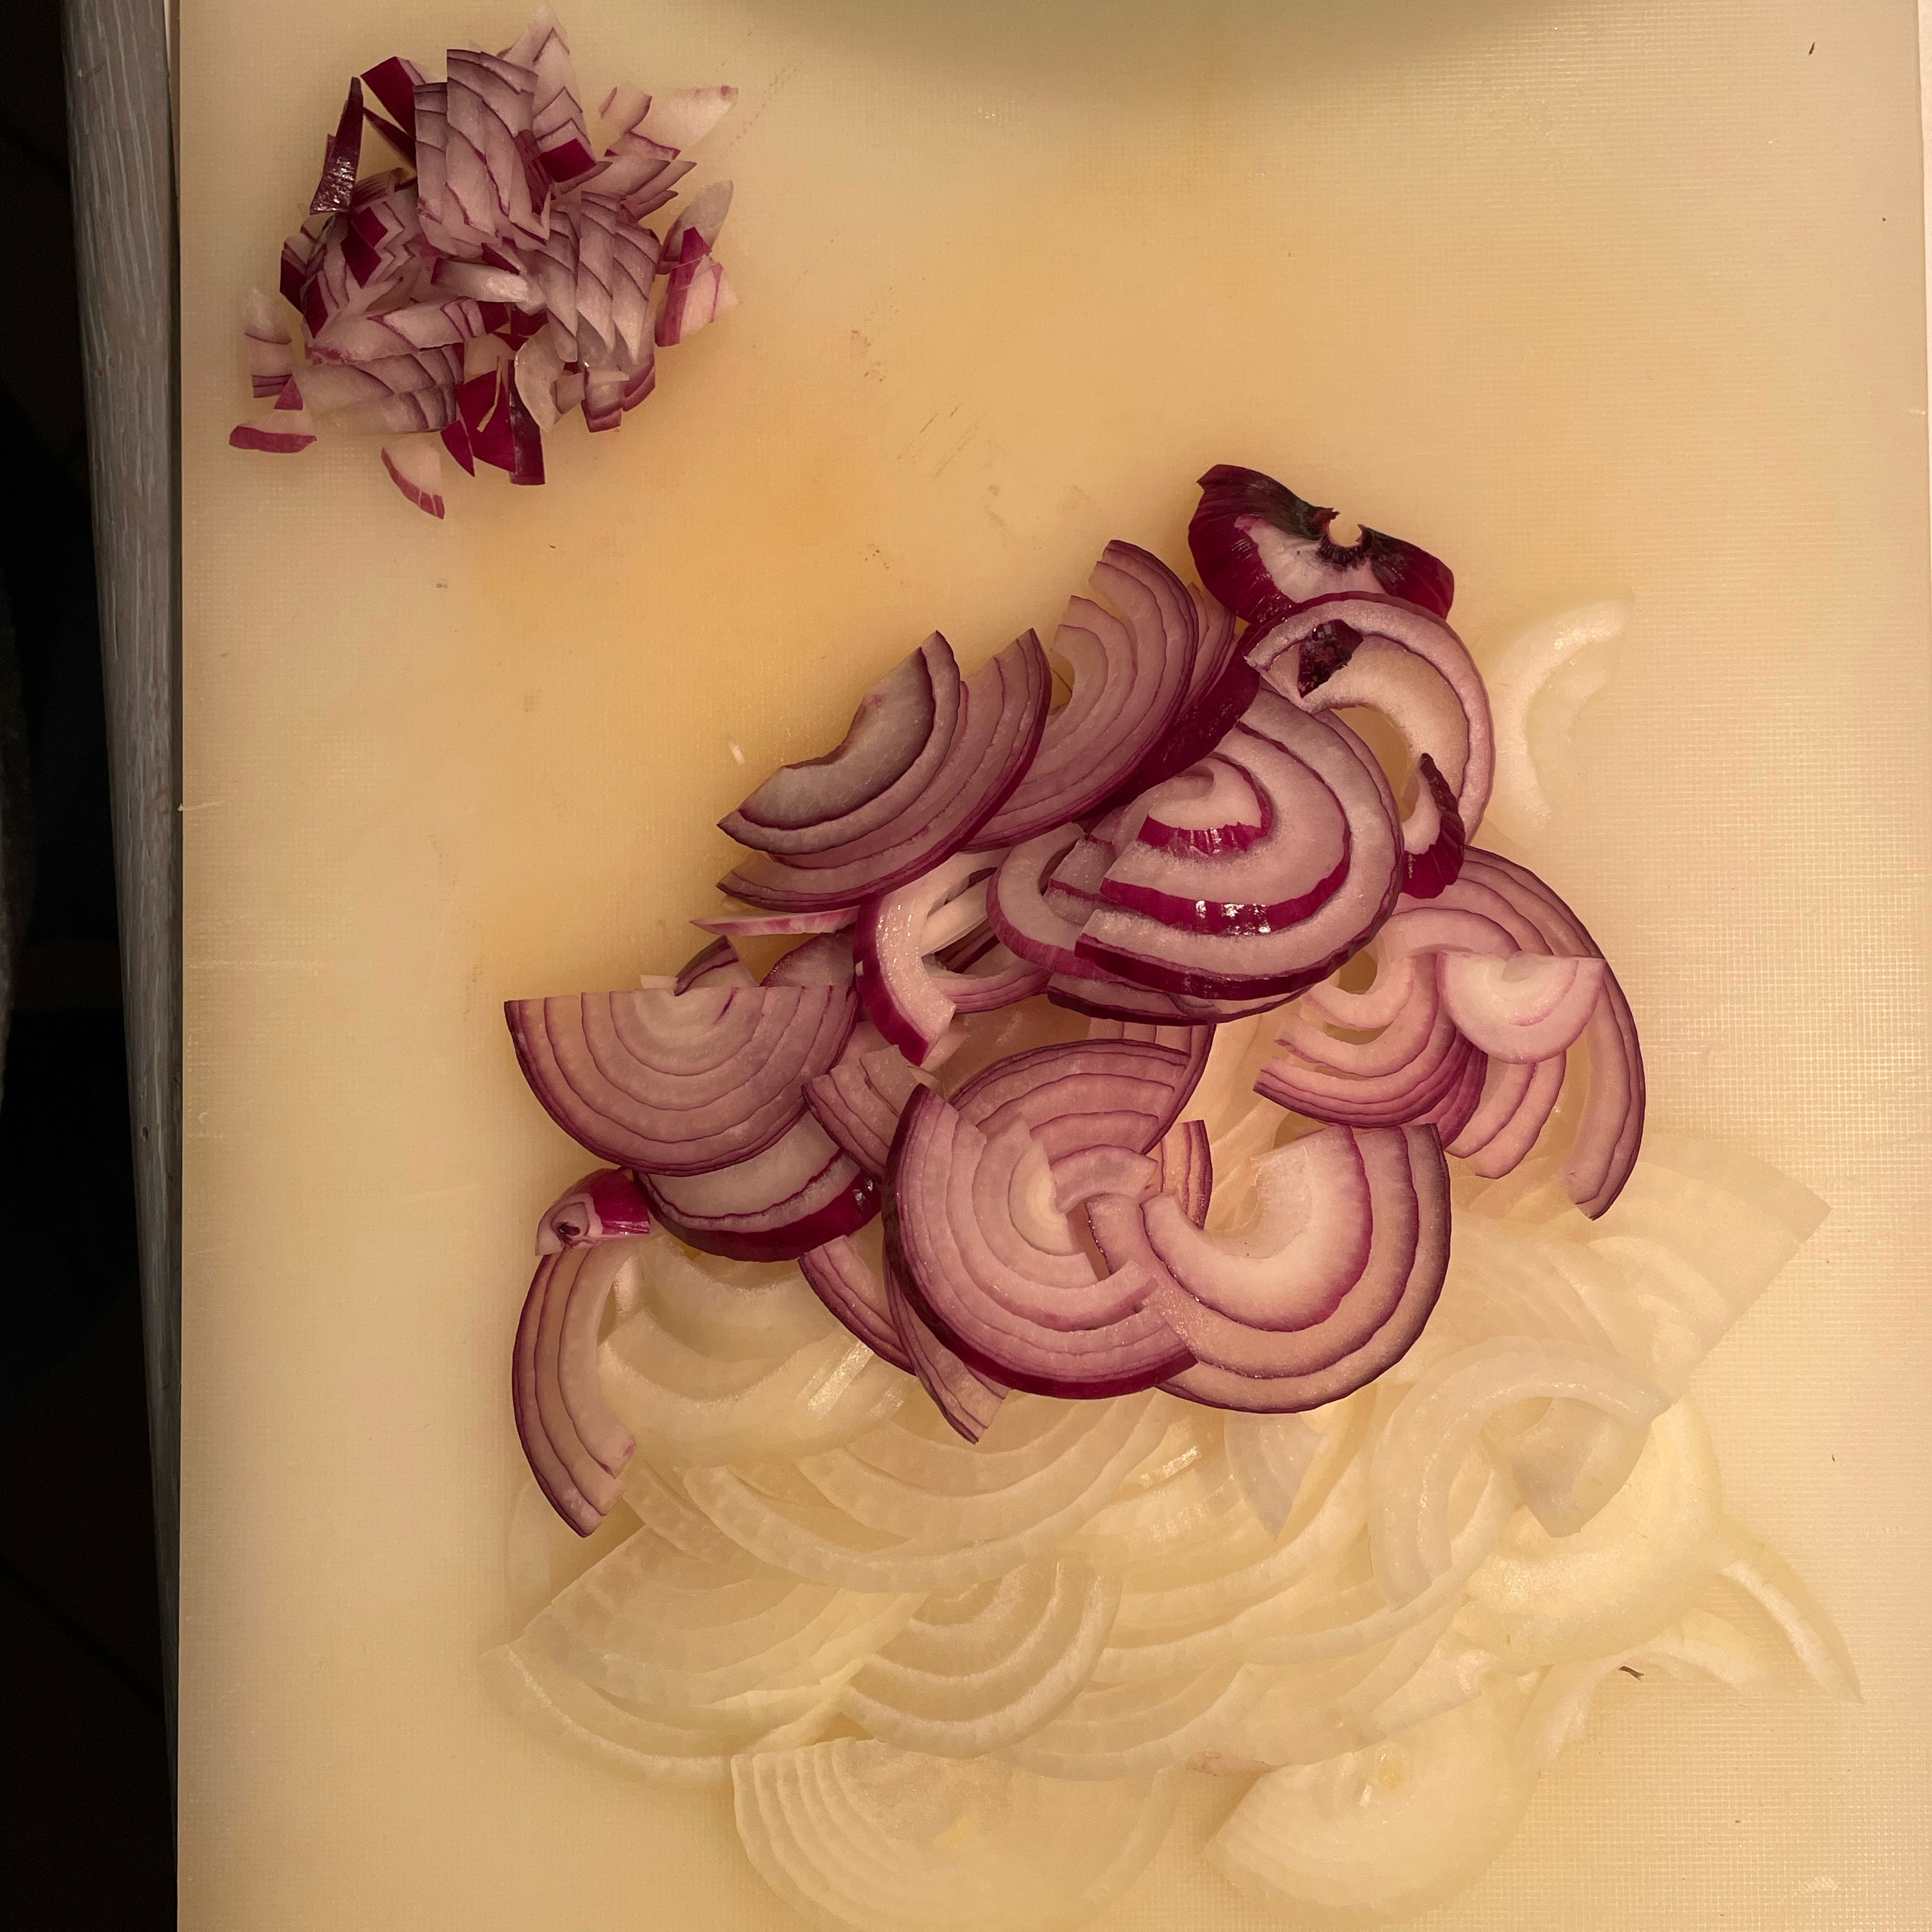 Slice onions and set aside about a quarter of the red onion for grinding that will yield 1tbsp of ground red onion. Dice the onion reserved for grinding.